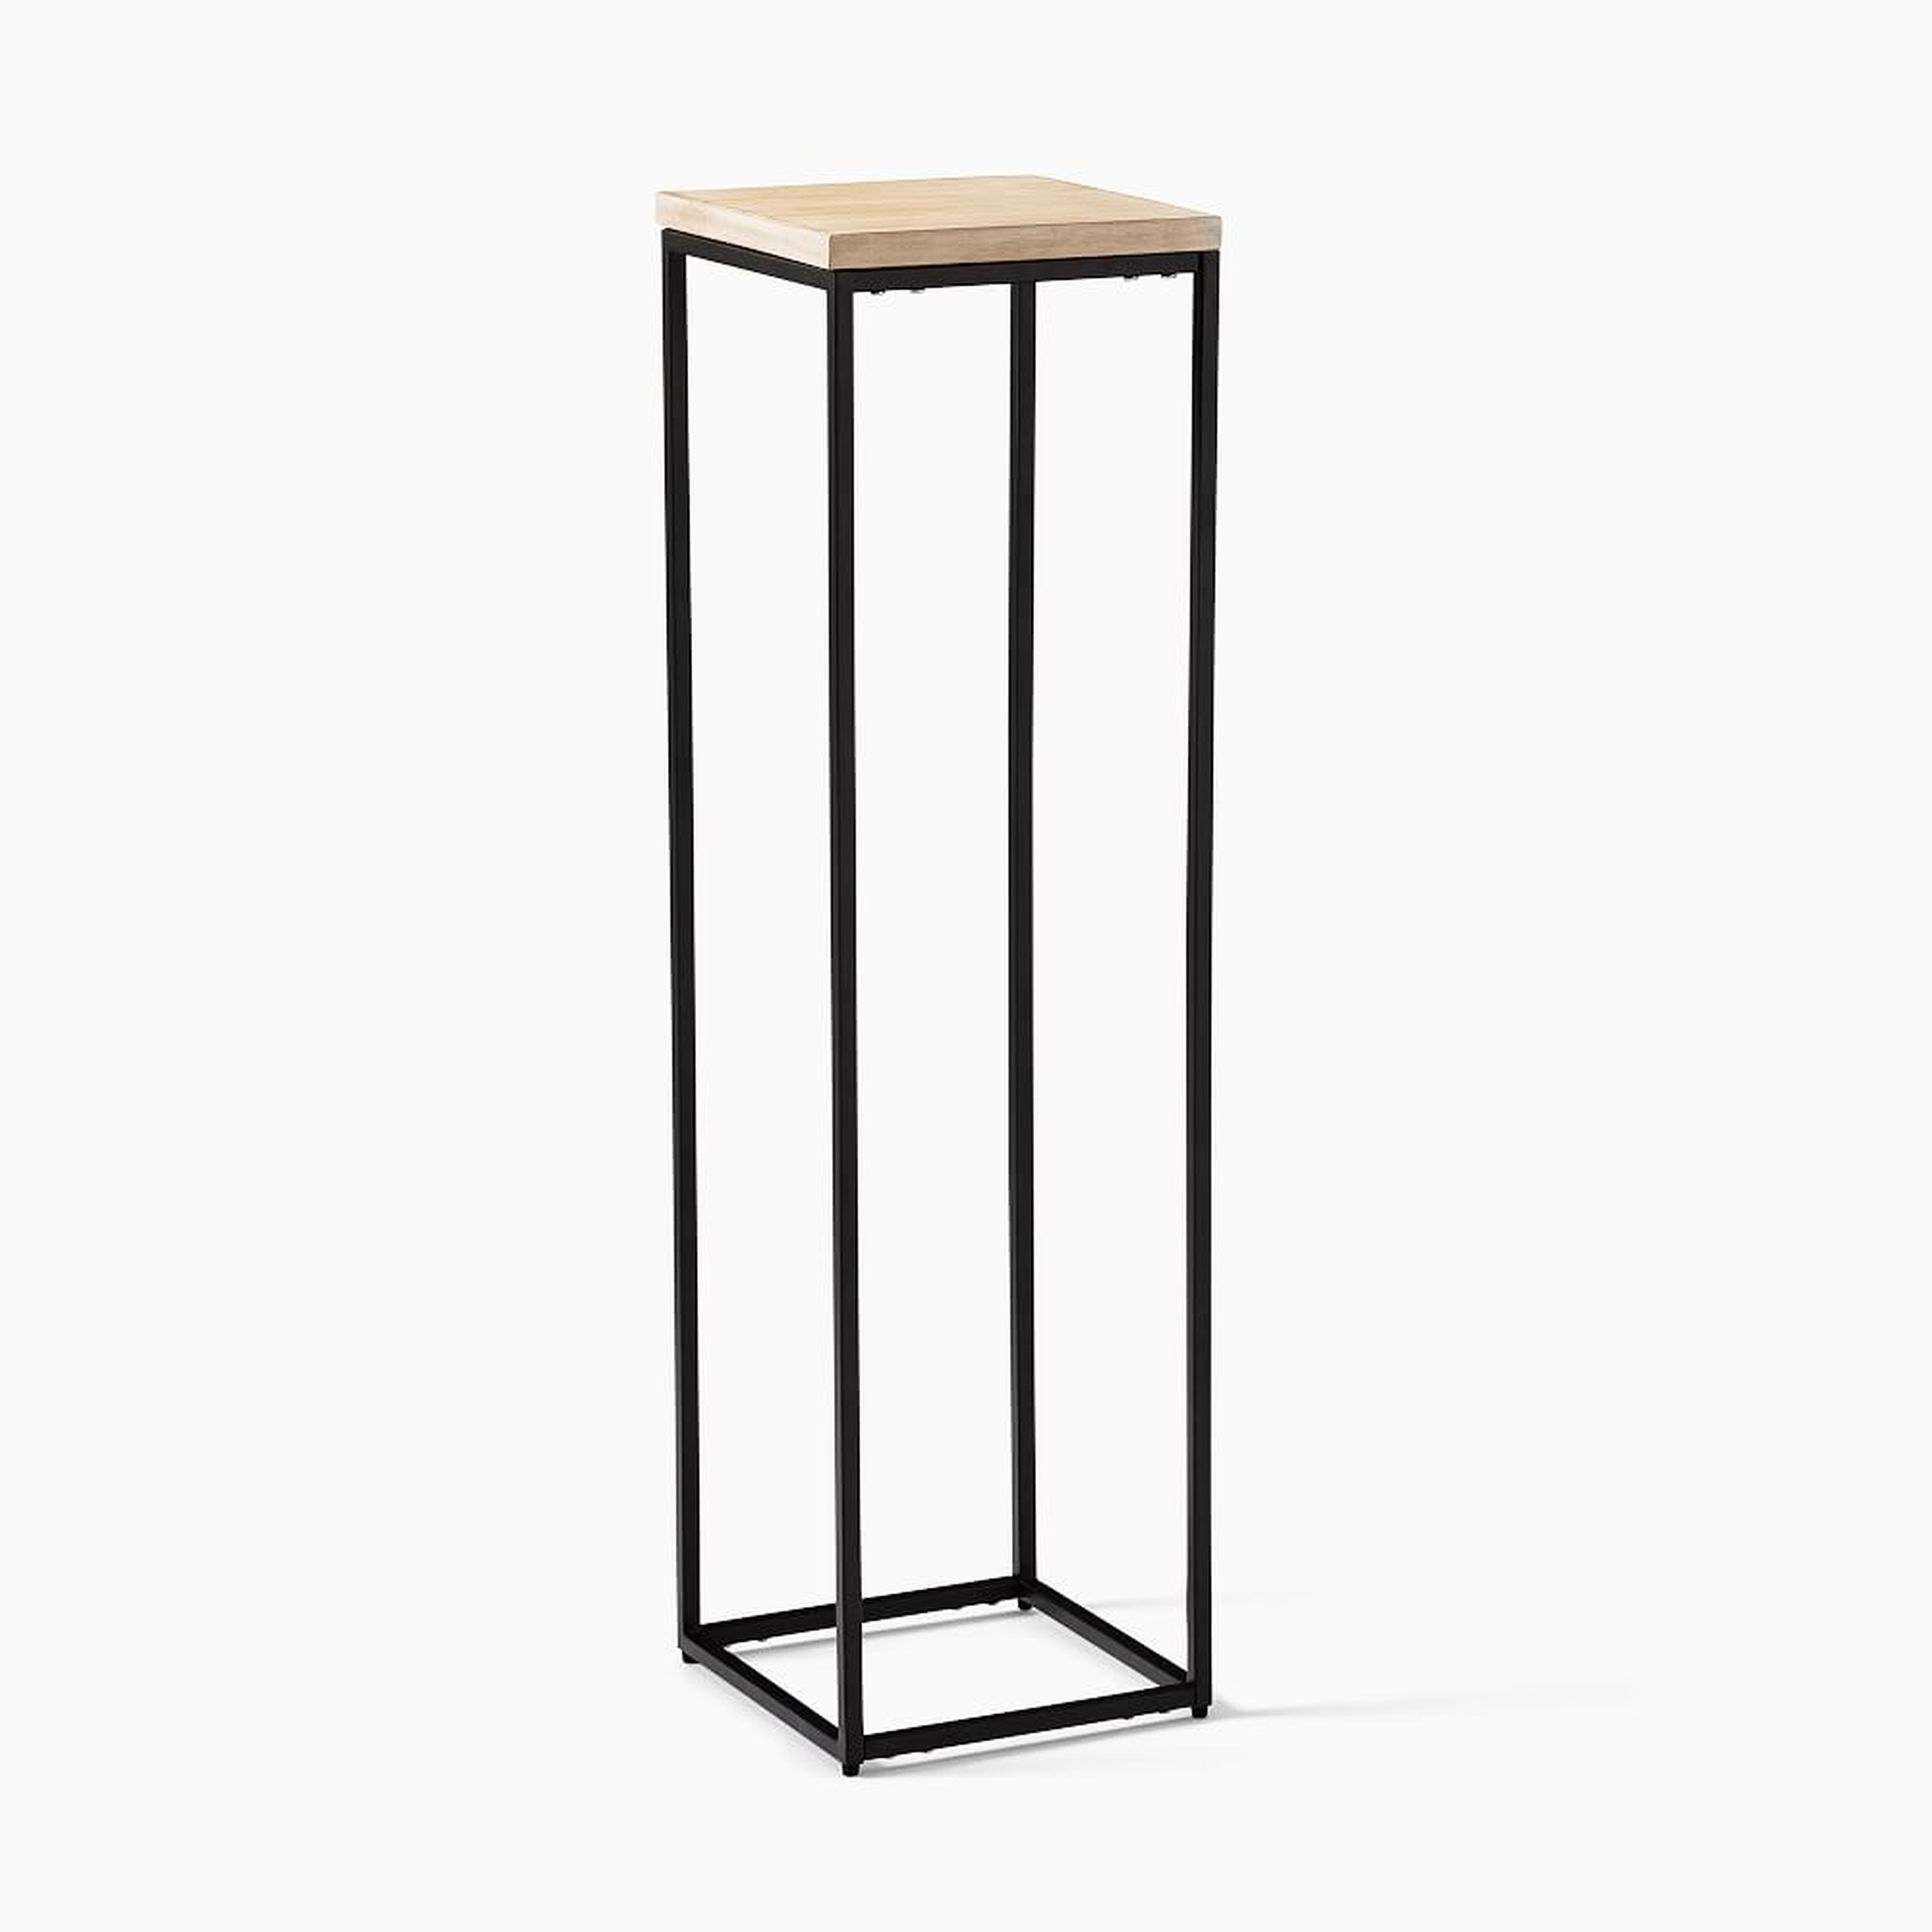 WE Streamline Collection Large Cerused White and Antique Bronze Pedestal Side Table - West Elm